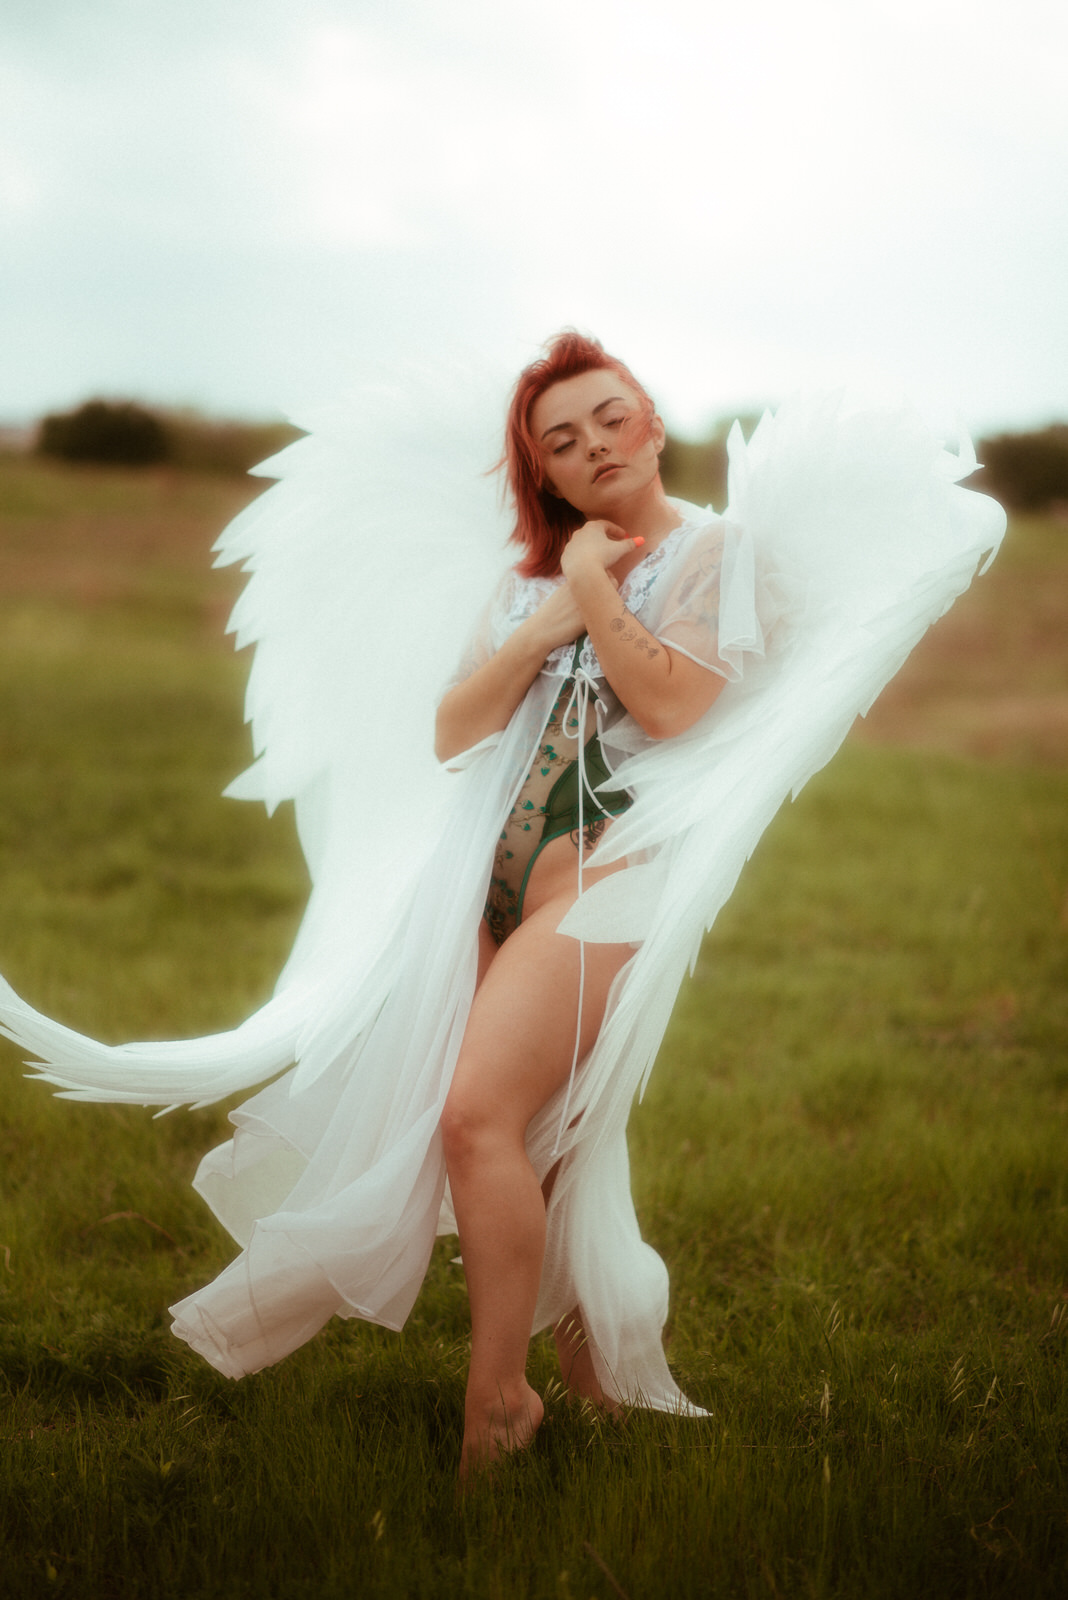 Outdoor photoshoot with large angel wings